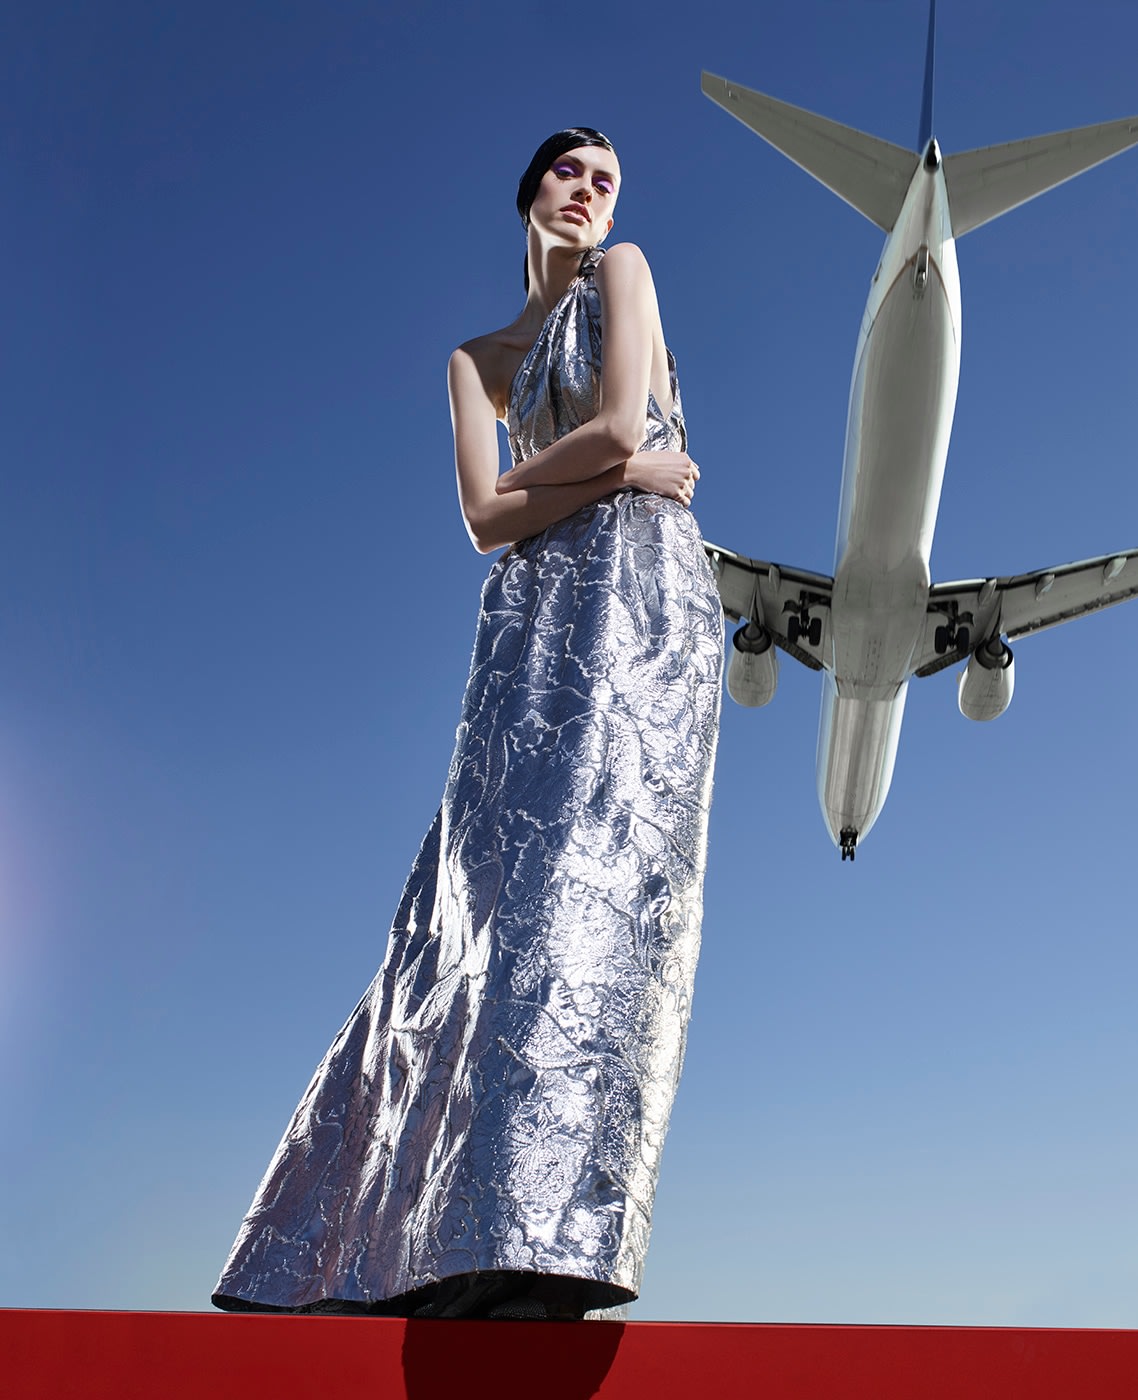 Fashion (with Silver Dress and Plane), Los Angeles, 2016, 50 x 32 1/2 Inches, Archival Pigment Print, Edition of 5